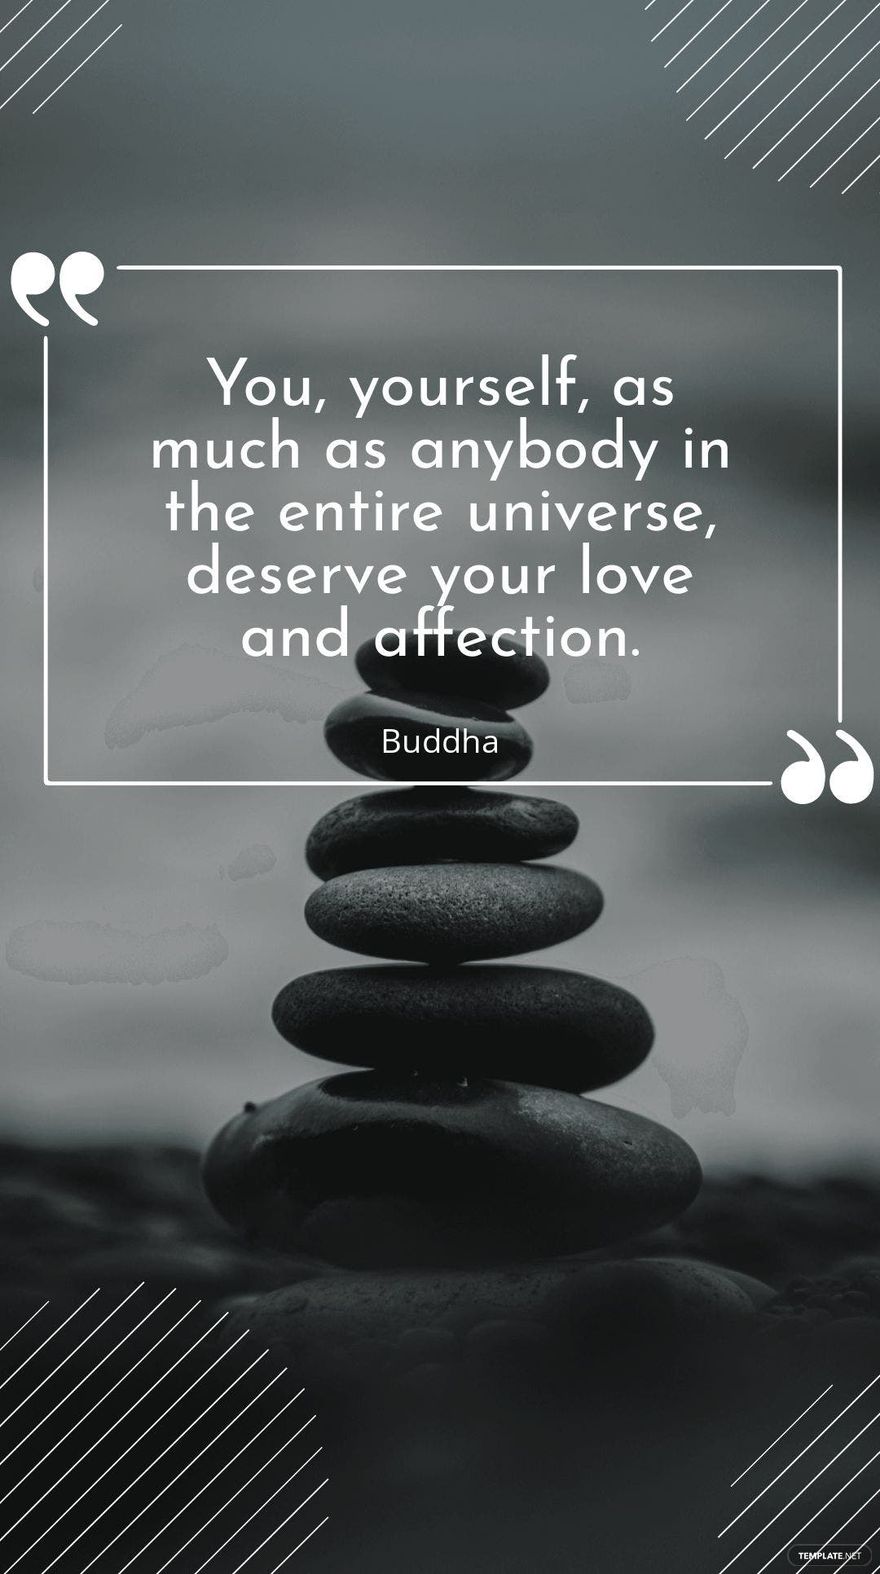 Buddha - “You, yourself, as much as anybody in the entire universe, deserve your love and affection.”  Template